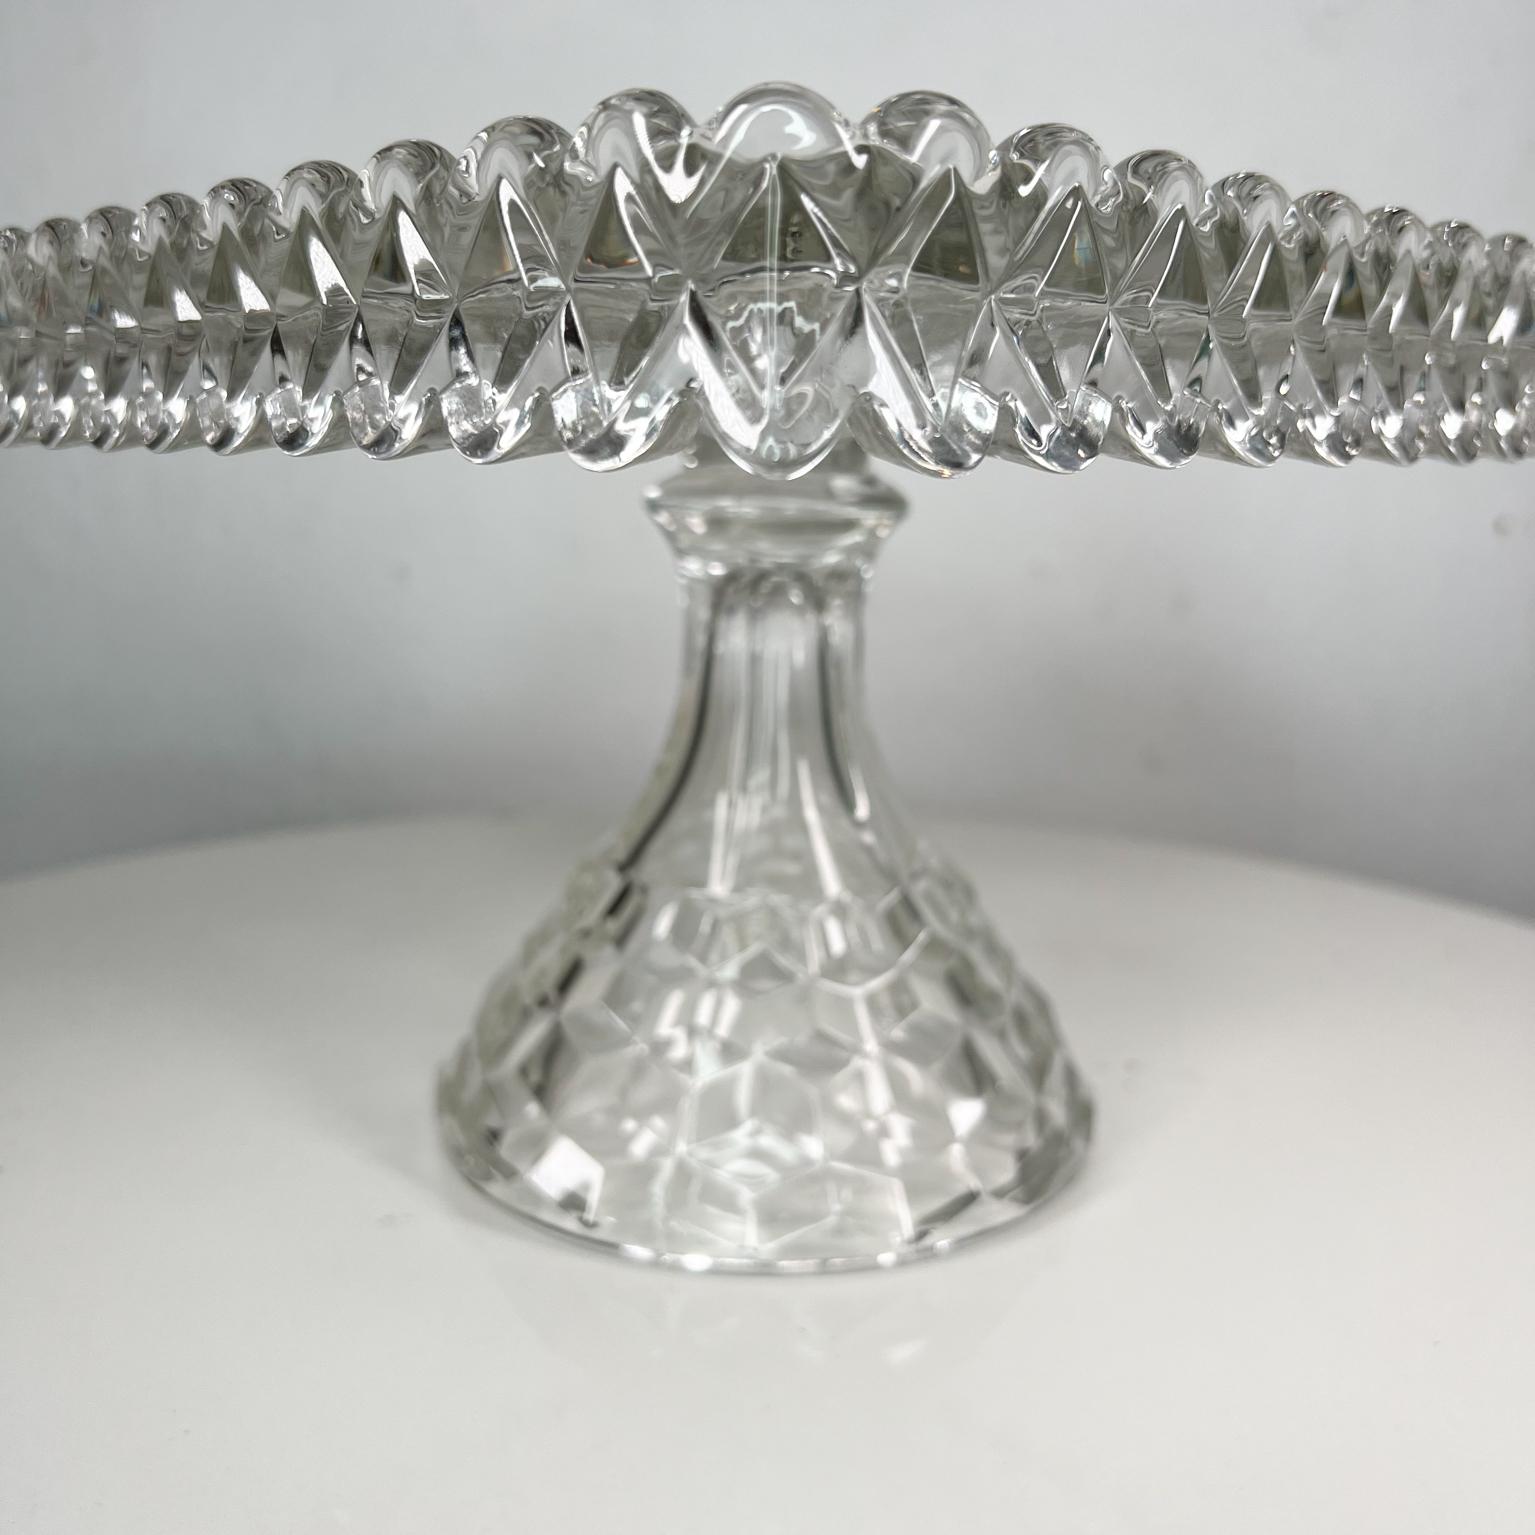 Antique Vintage Fostoria American series clear Stem square Cake stand 
Pedestal Base, Rum well and Ruffled edge
Measures: 10 x 10 x 7.25 tall
Preowned original vintage condition.
Review images provided.

